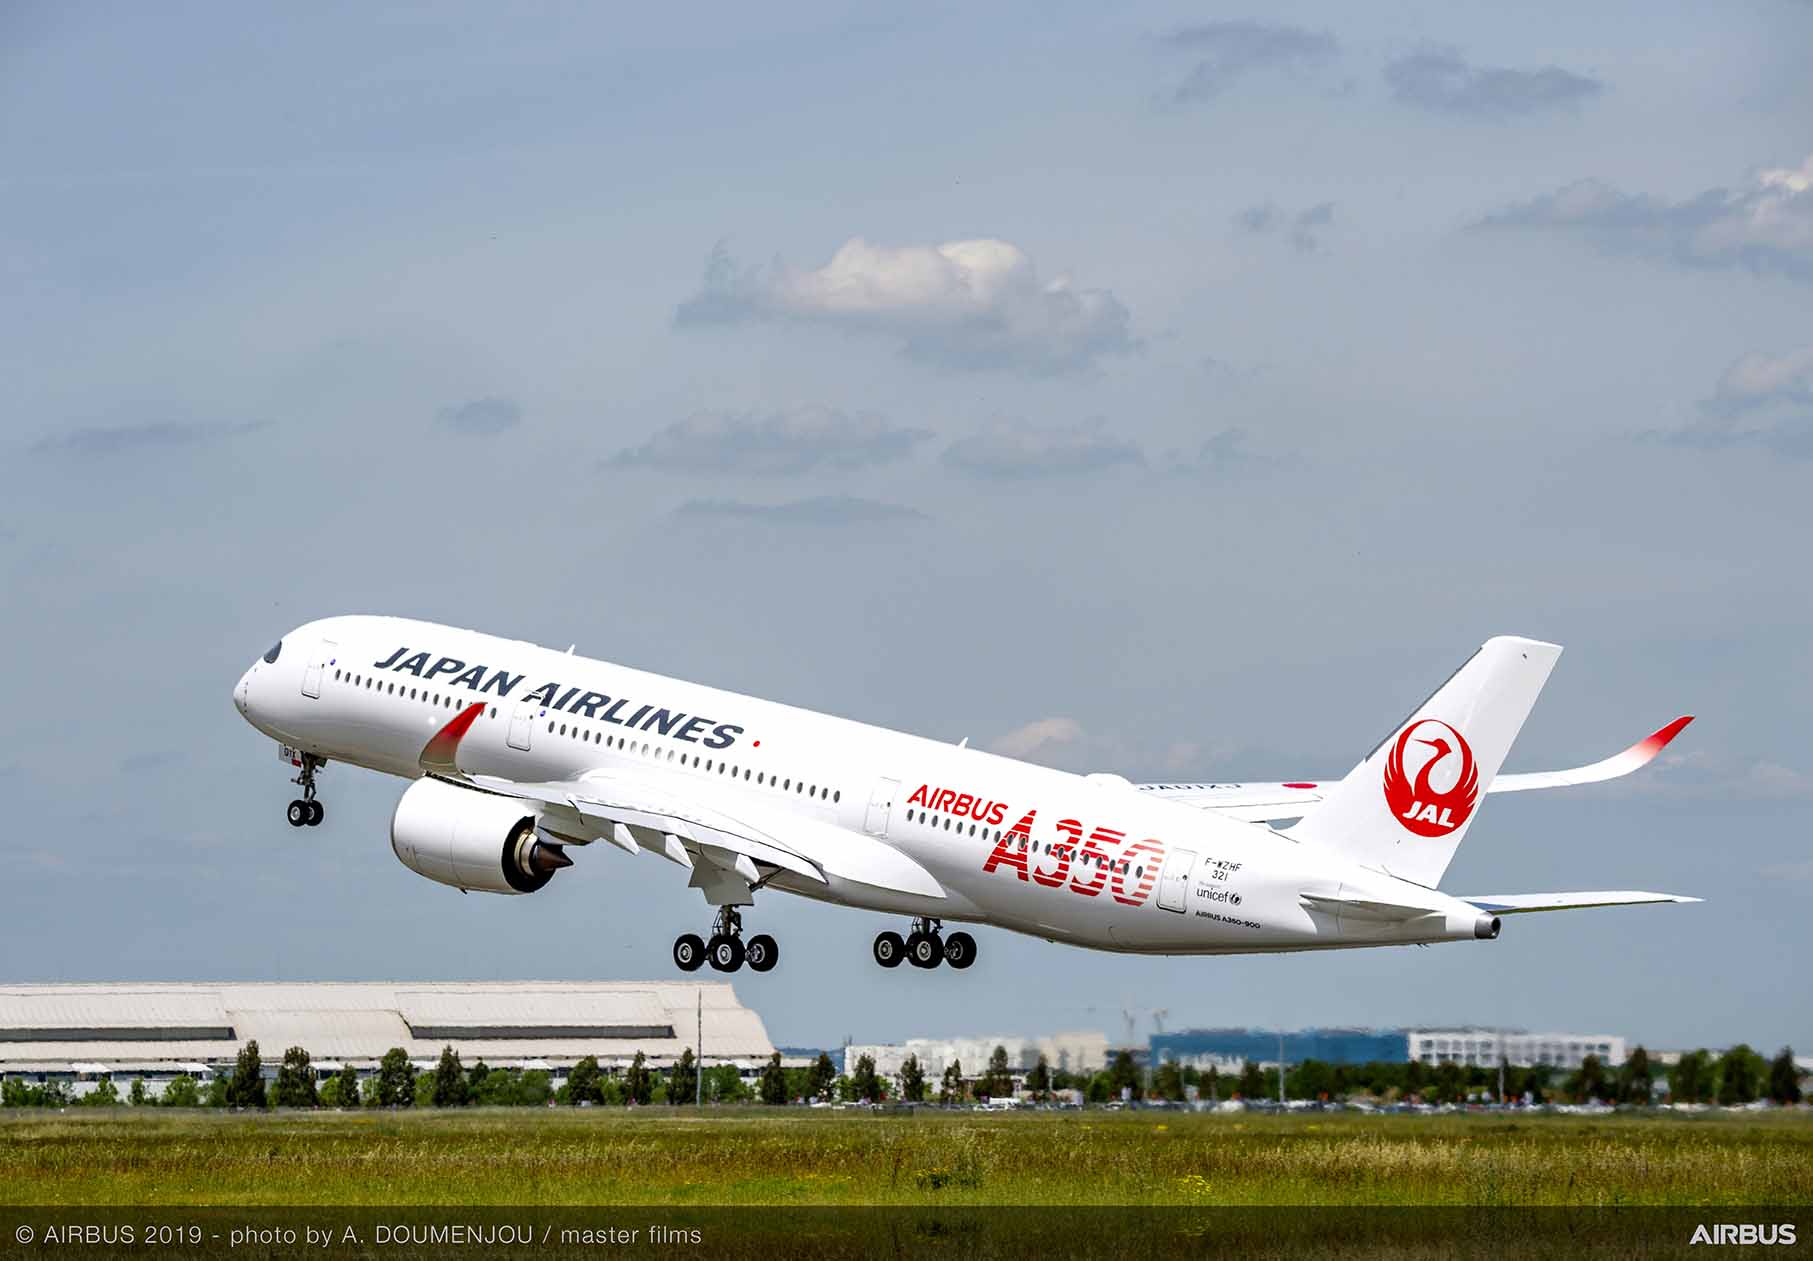 JAL’s international capacity exceeds demands due to pandemic restrictions